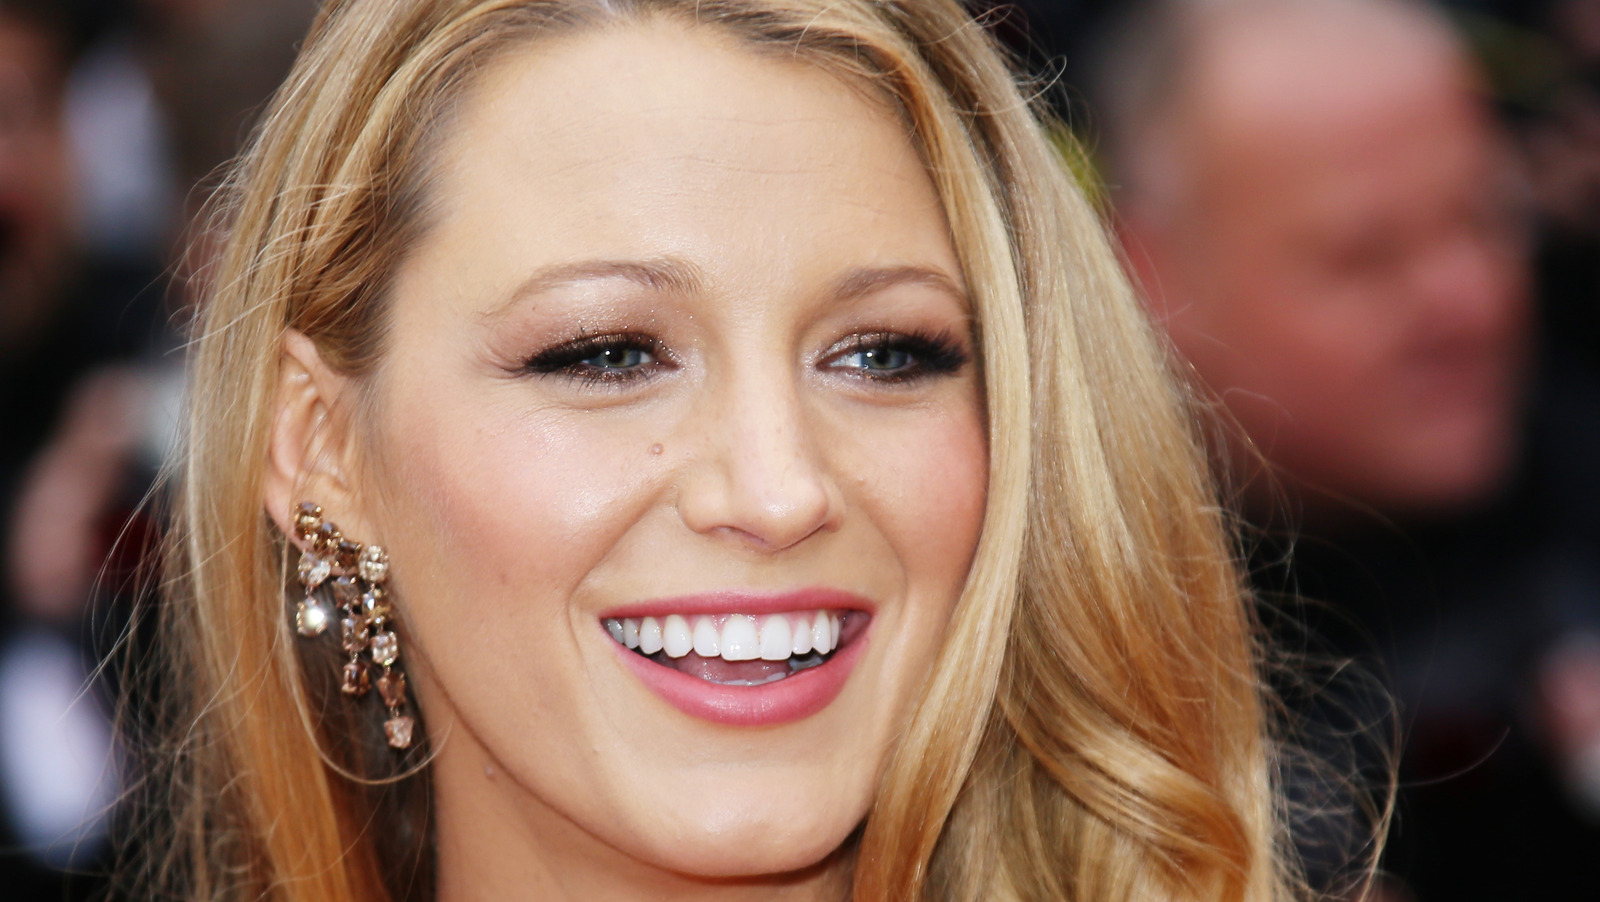 Blake Lively Talks 'Betty Buzz' And Dominating The Mixer Drink Industry